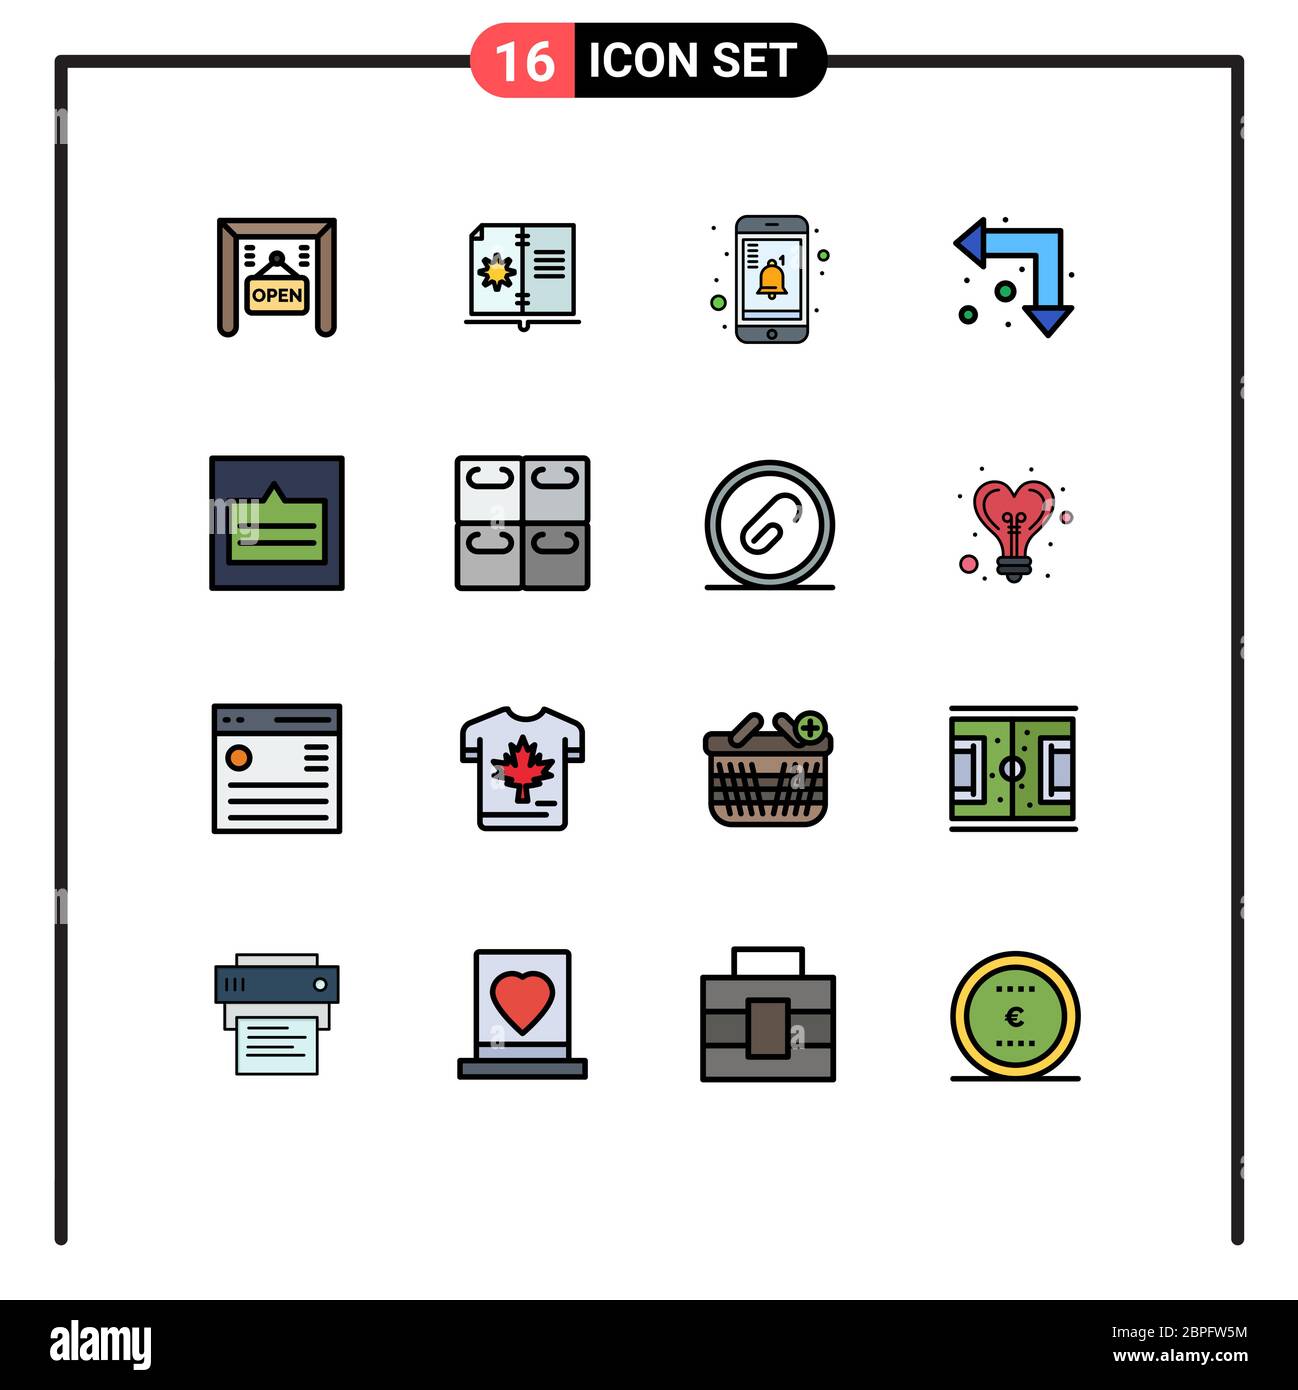 Set of 16 Modern UI Icons Symbols Signs for popup, layout, notification, grid, up left Editable Creative Vector Design Elements Stock Vector